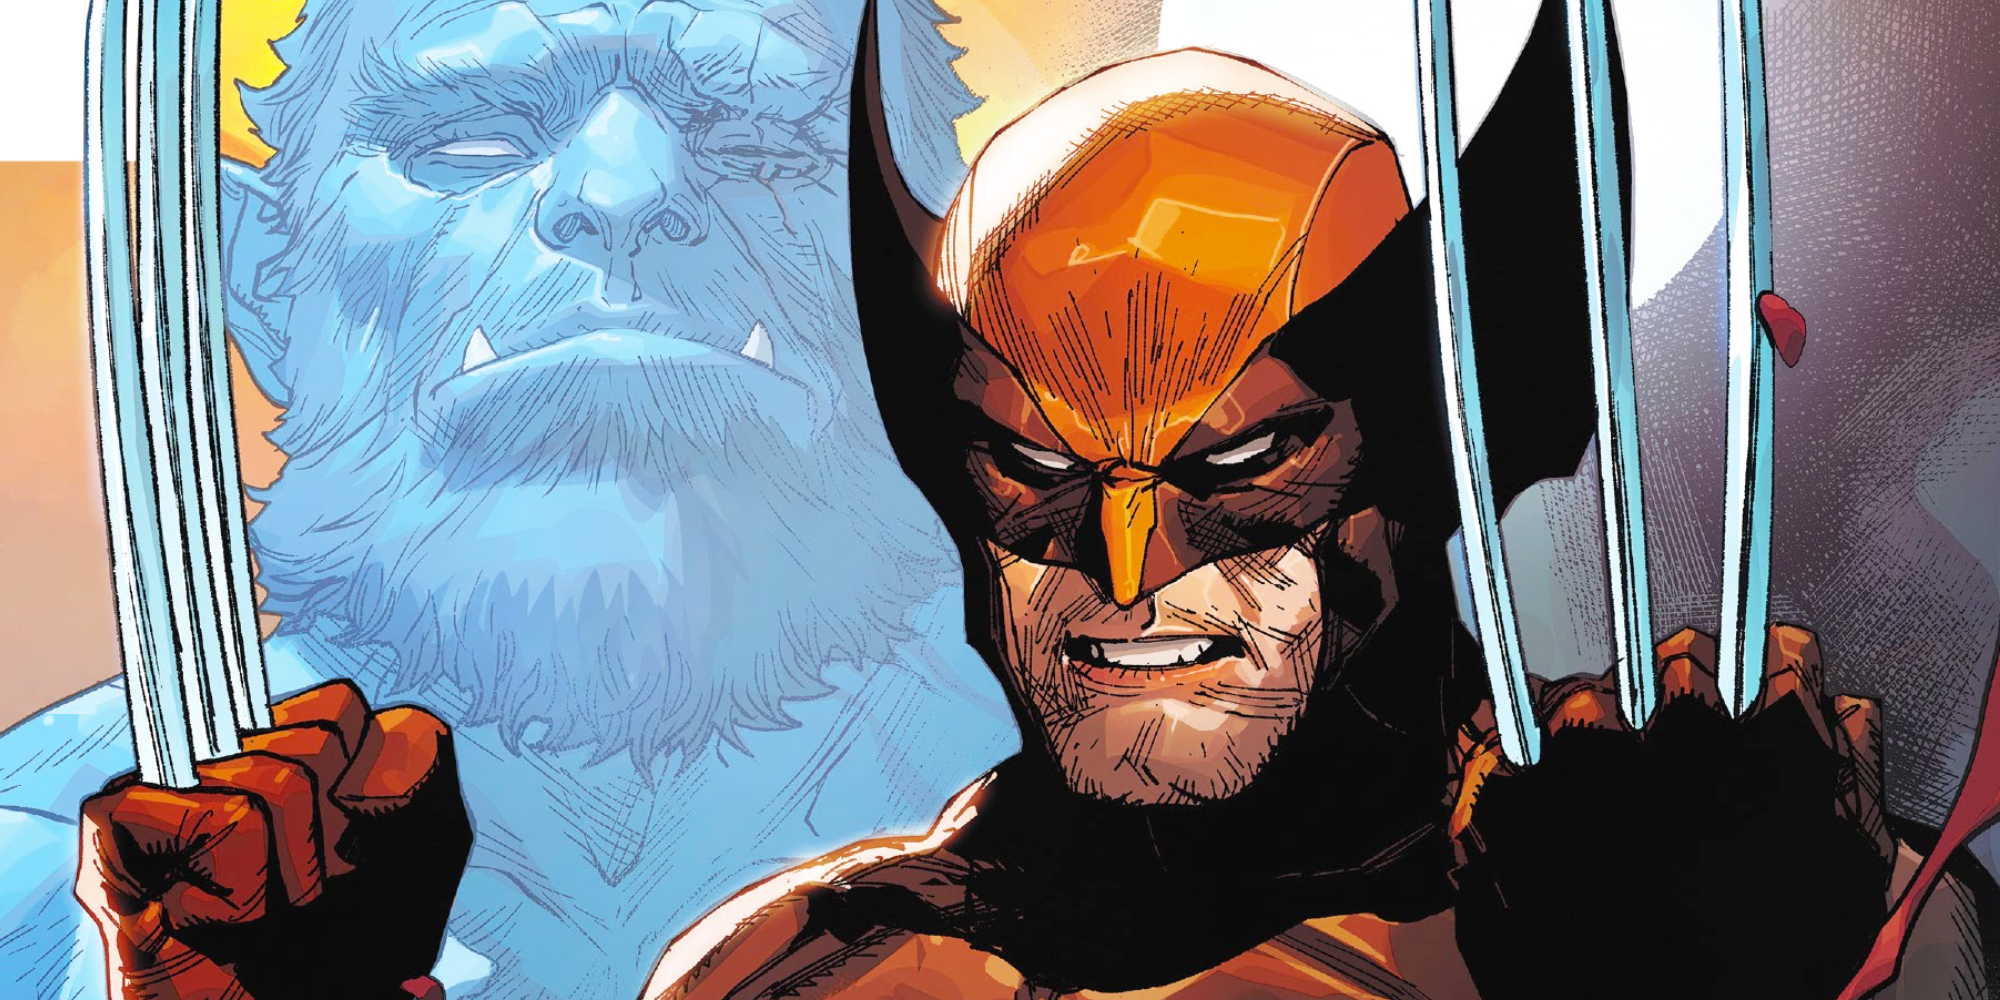 X-Men's Wolverine and Beast in Marvel Comics